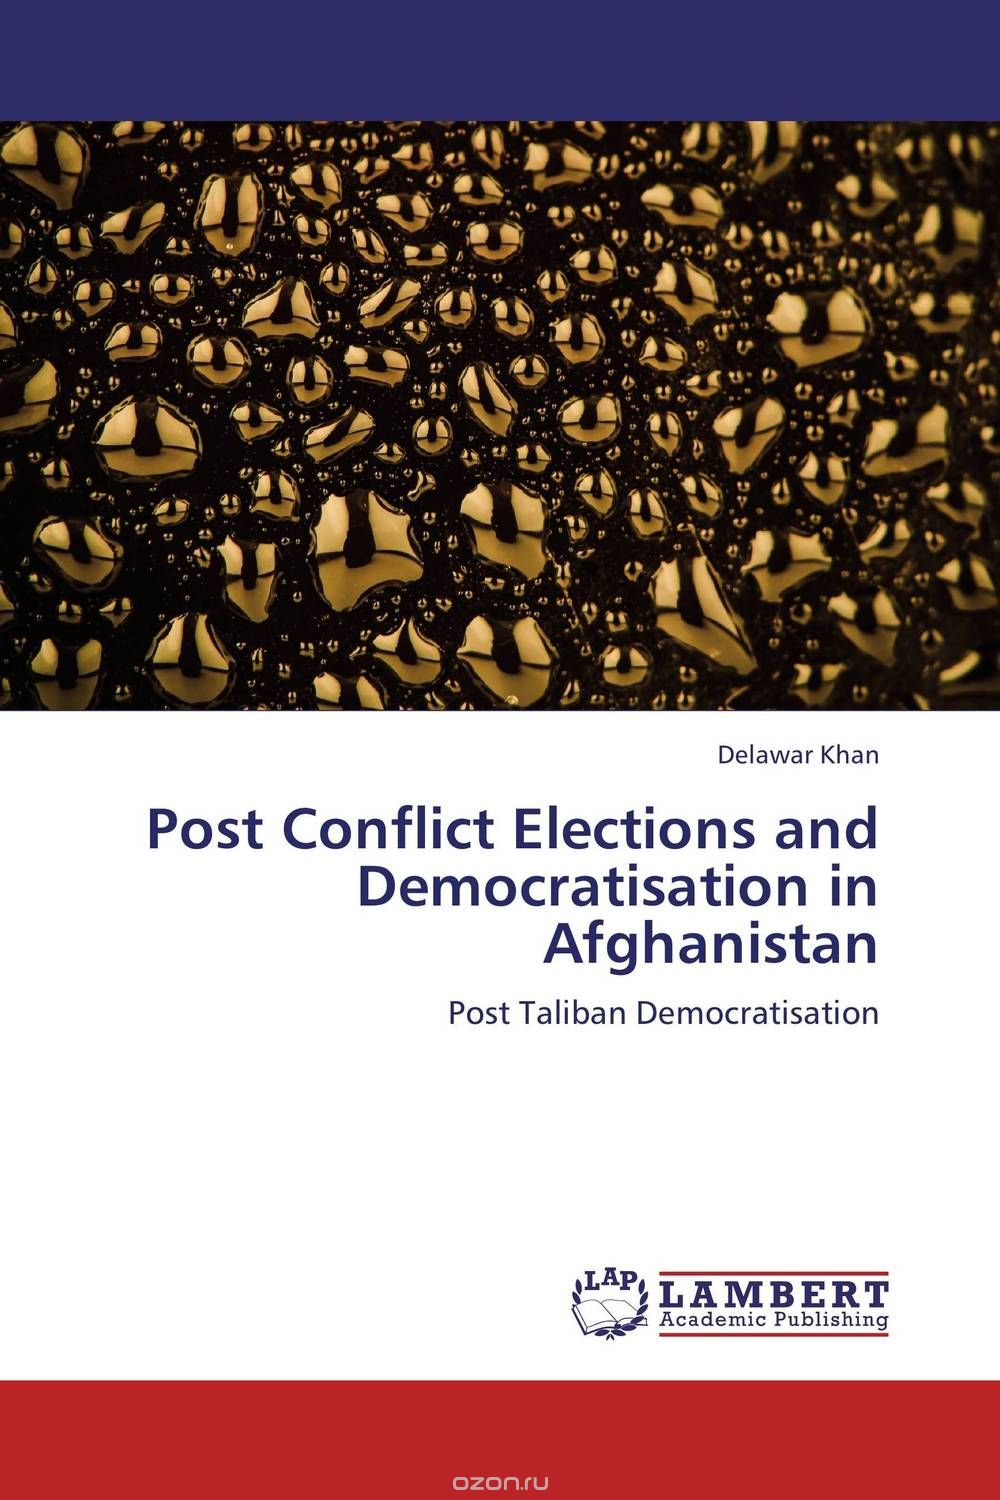 Post Conflict Elections and Democratisation in Afghanistan